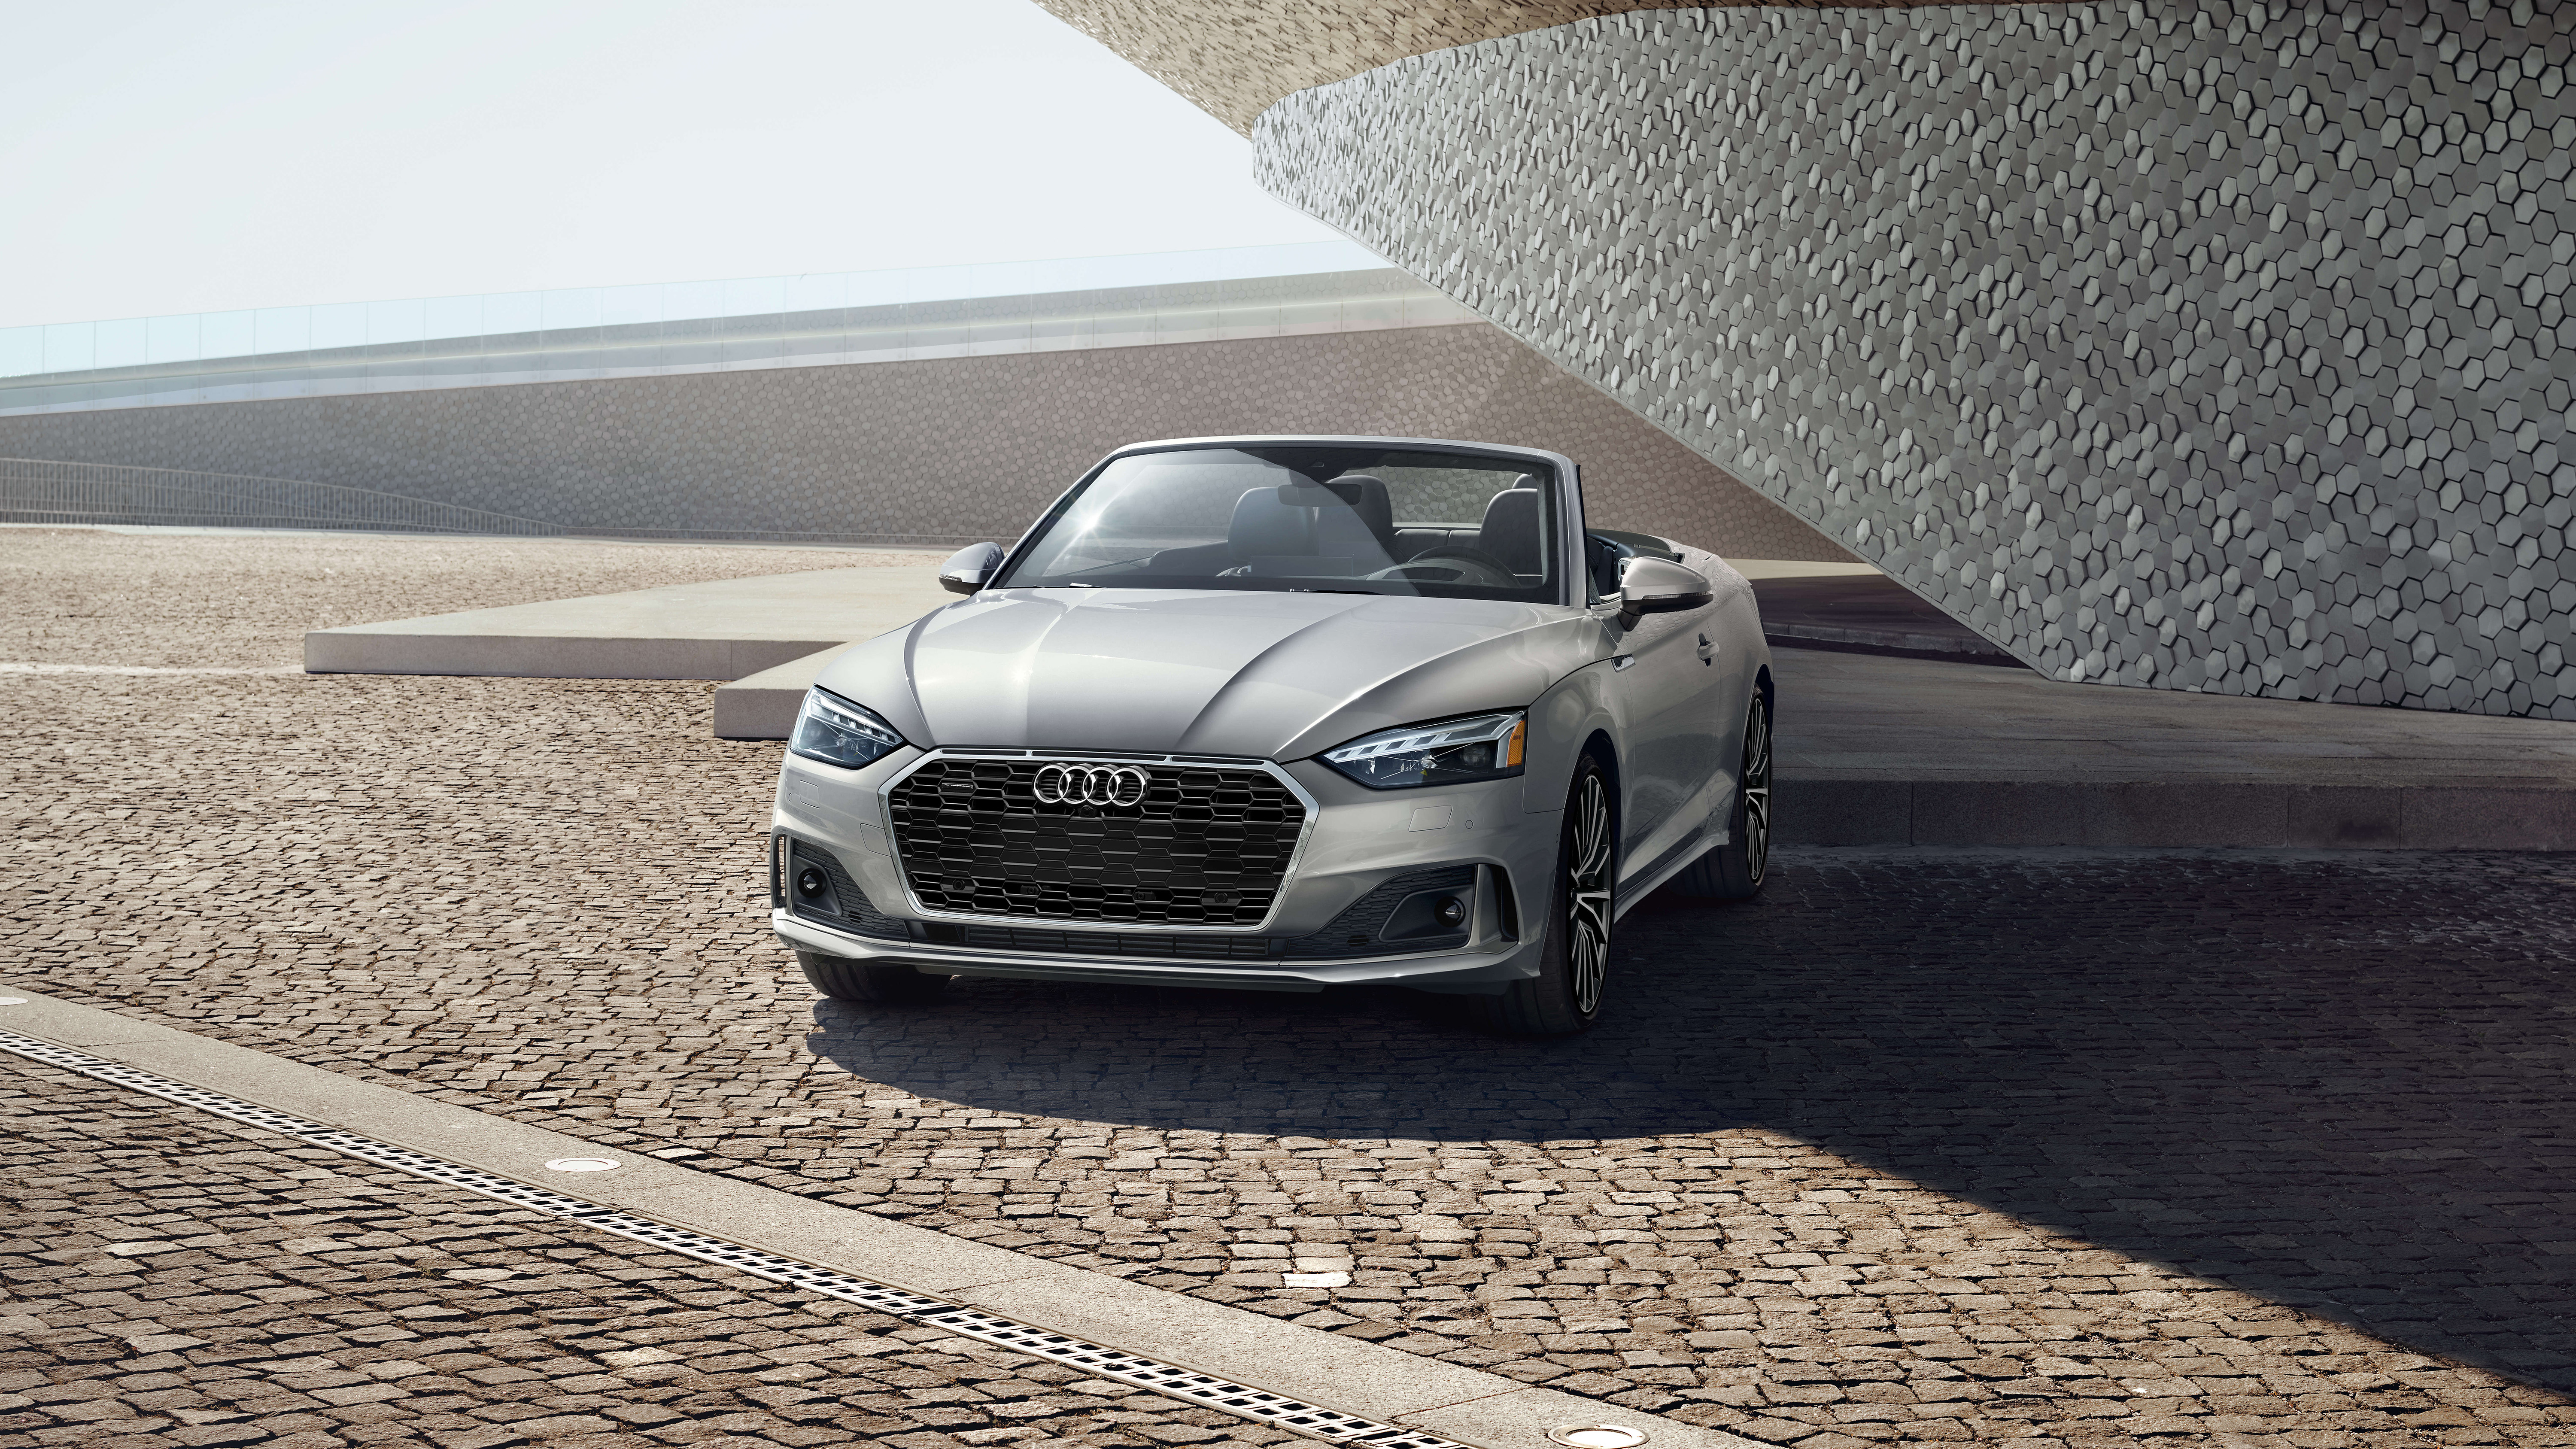 Audi A5 Cabriolet 2020 Review , HD Wallpaper & Backgrounds